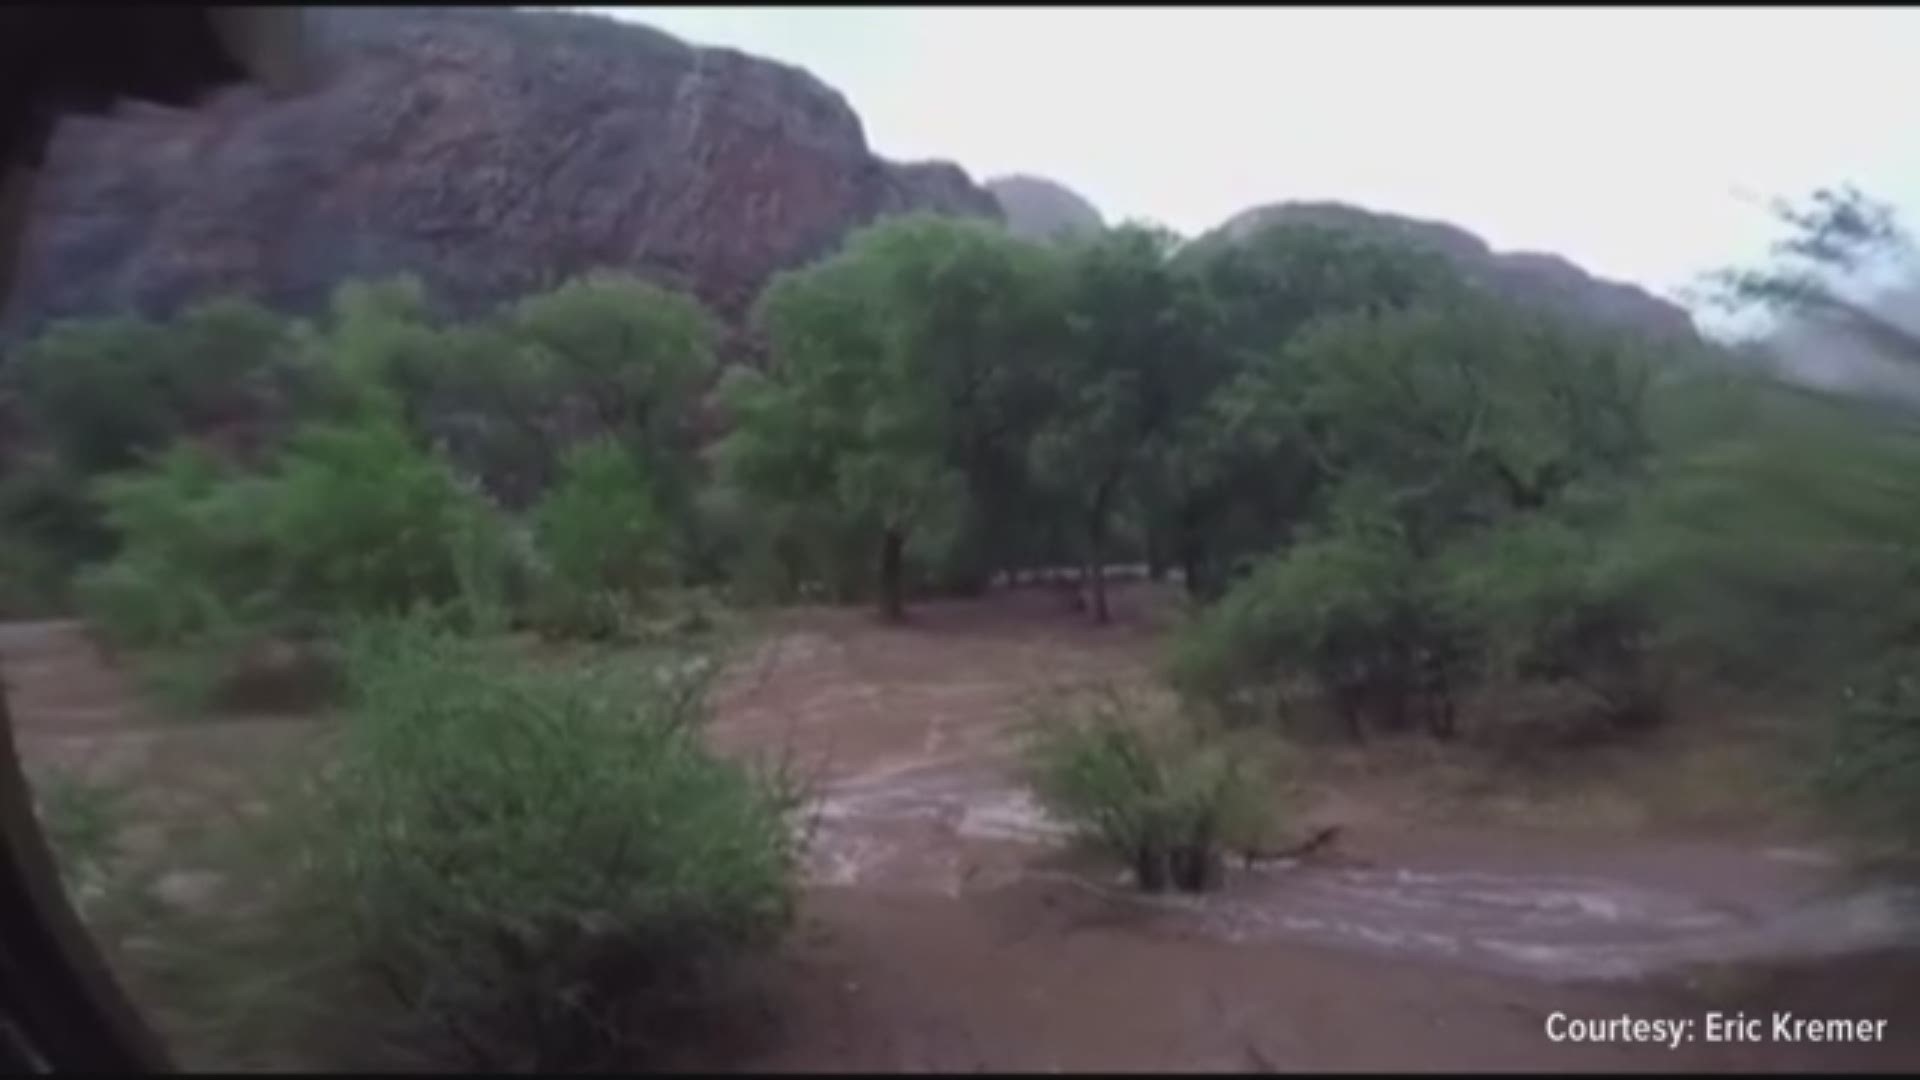 Las Vegas resident Eric Kremer shares photos and videos of the flash flood at the Havasupai campgrounds on July 11.